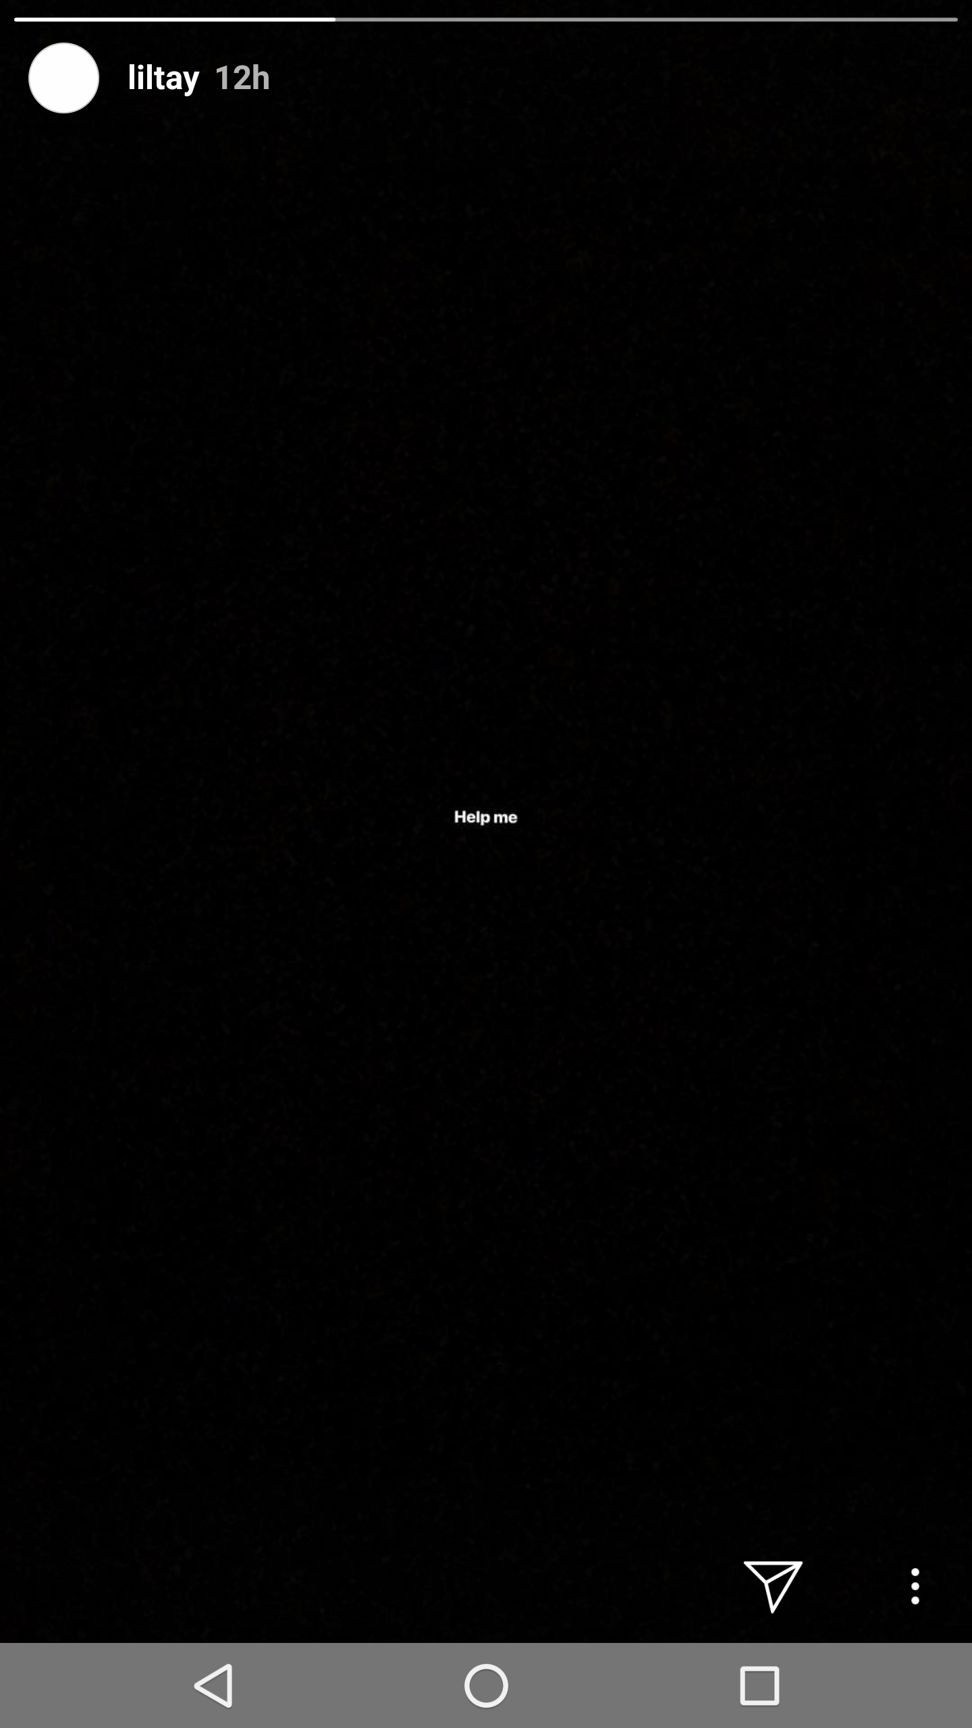 Lil Tay’s “Help me” message posted on Instagram.